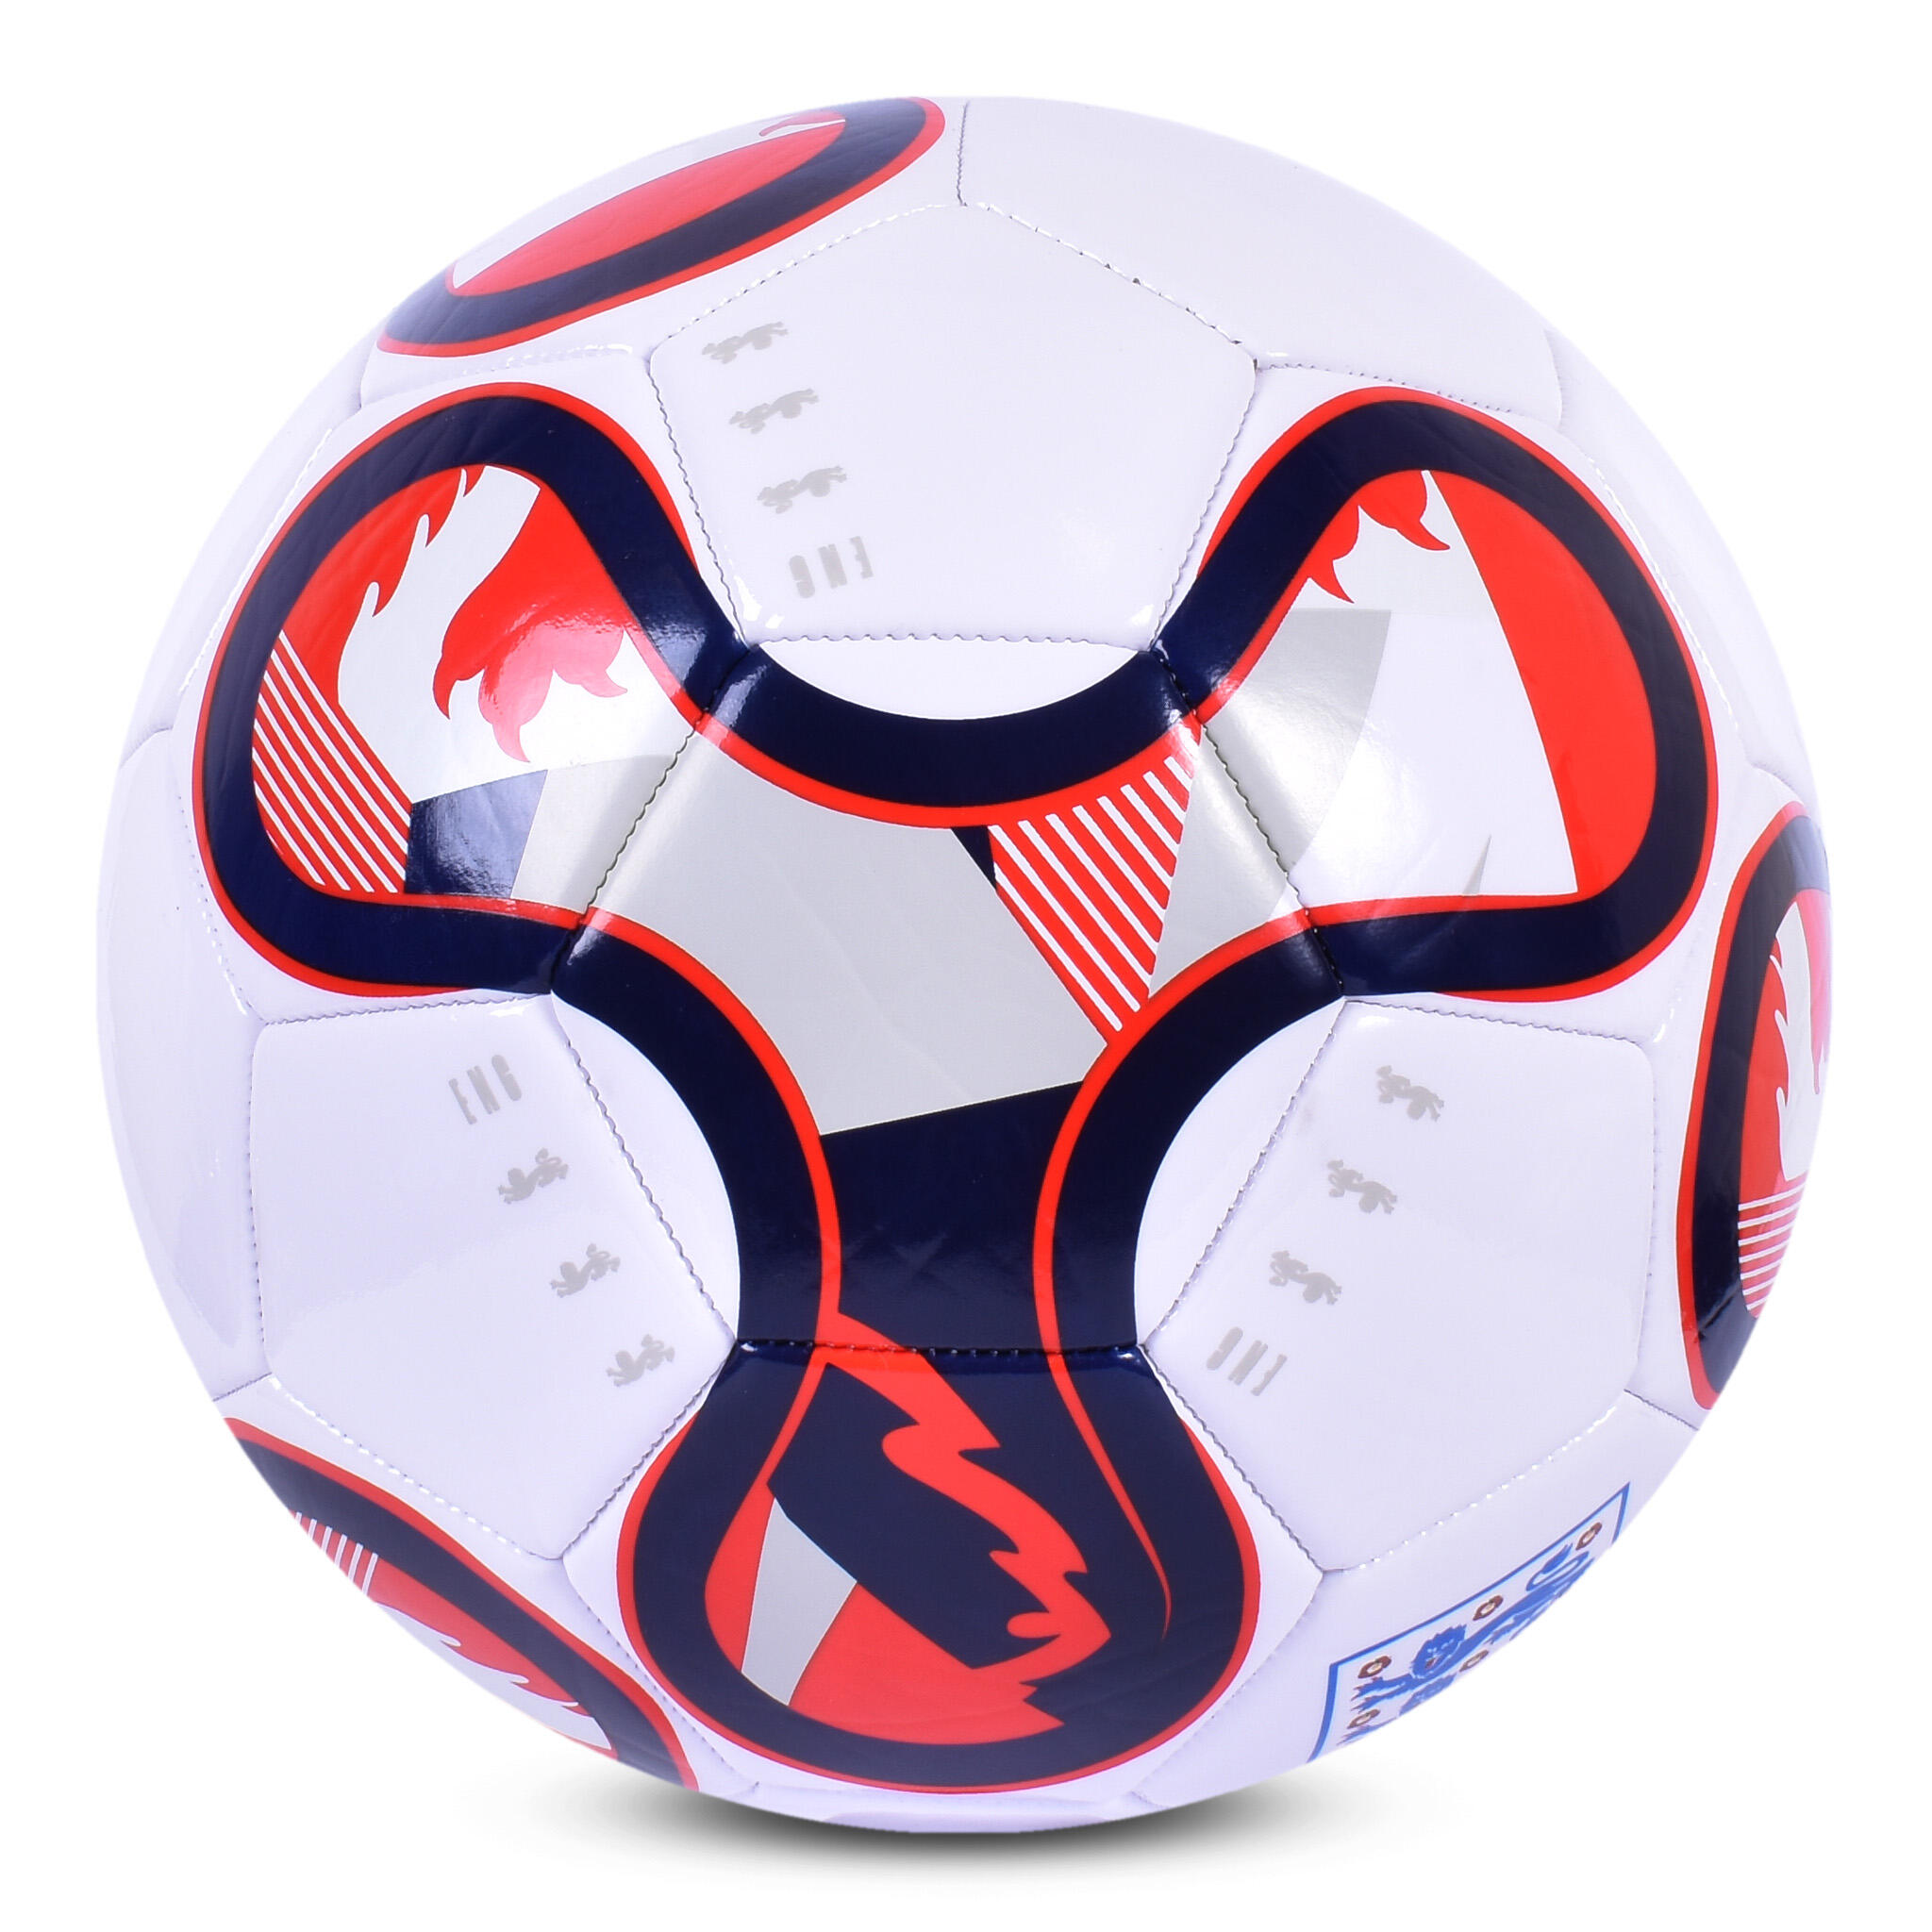 England Supporter Football Size 5 White Red Blue 2/3